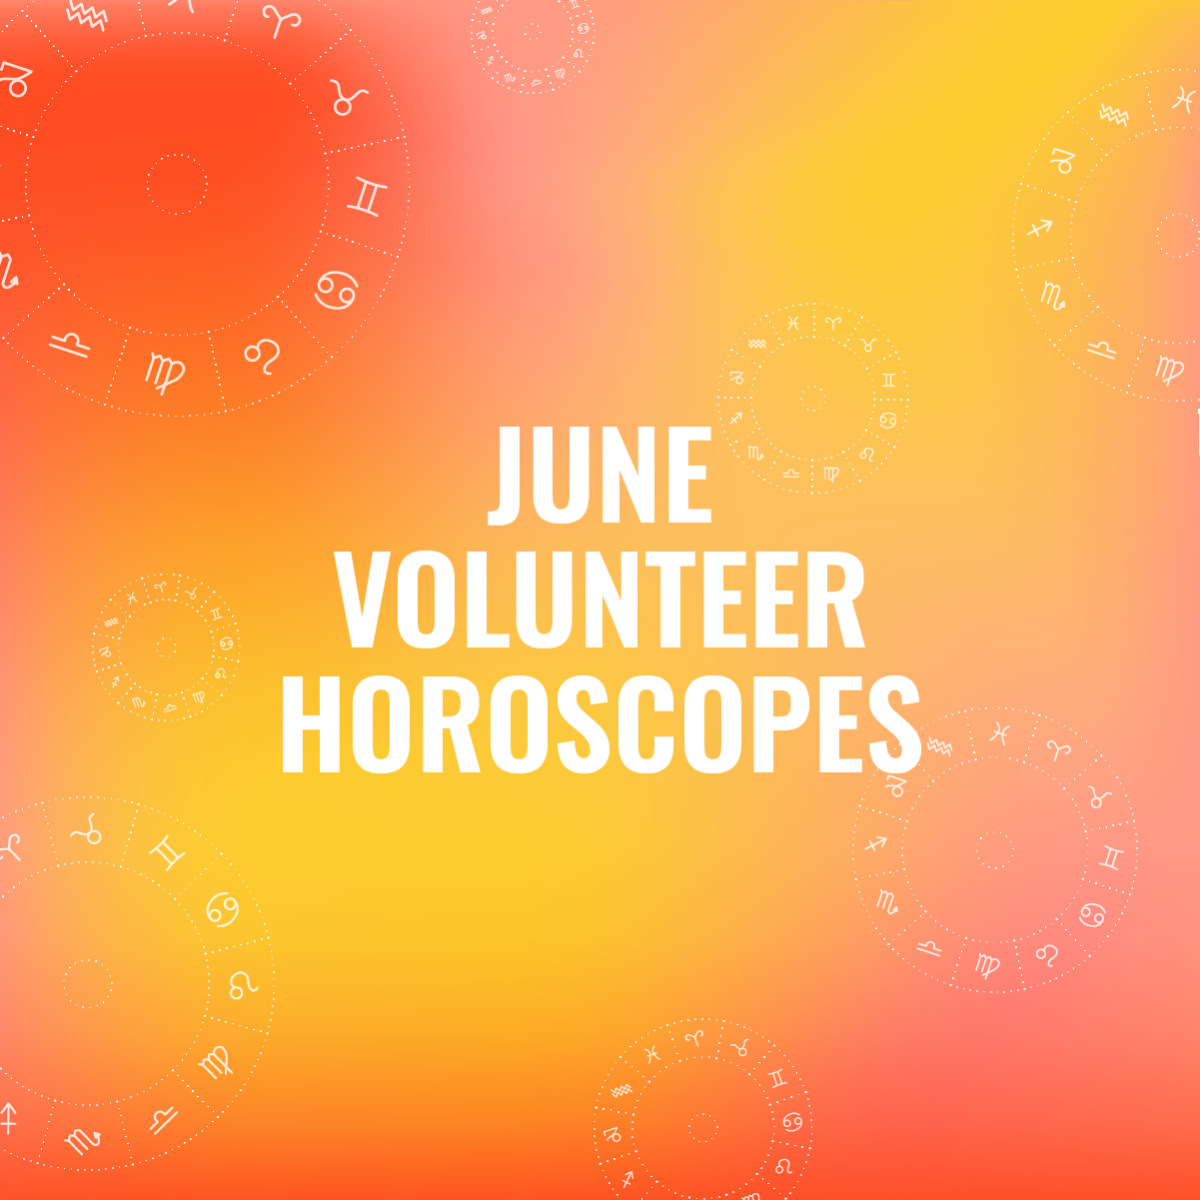 Your June Volunteer Horoscopes Are Here!